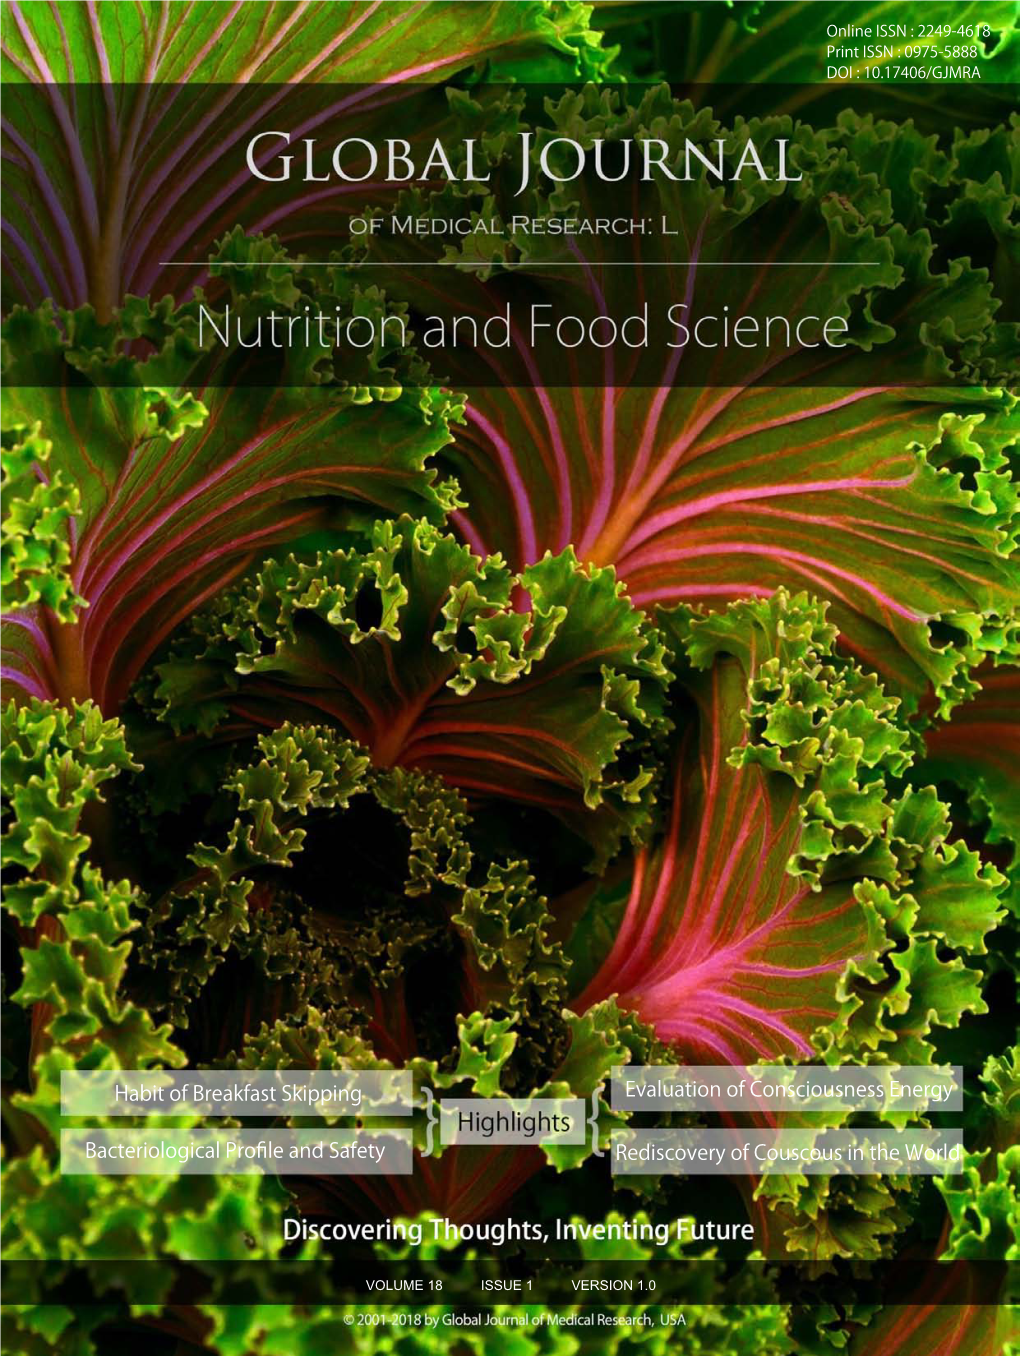 Global Journal of Medical Research: L Nutrition & Food Science